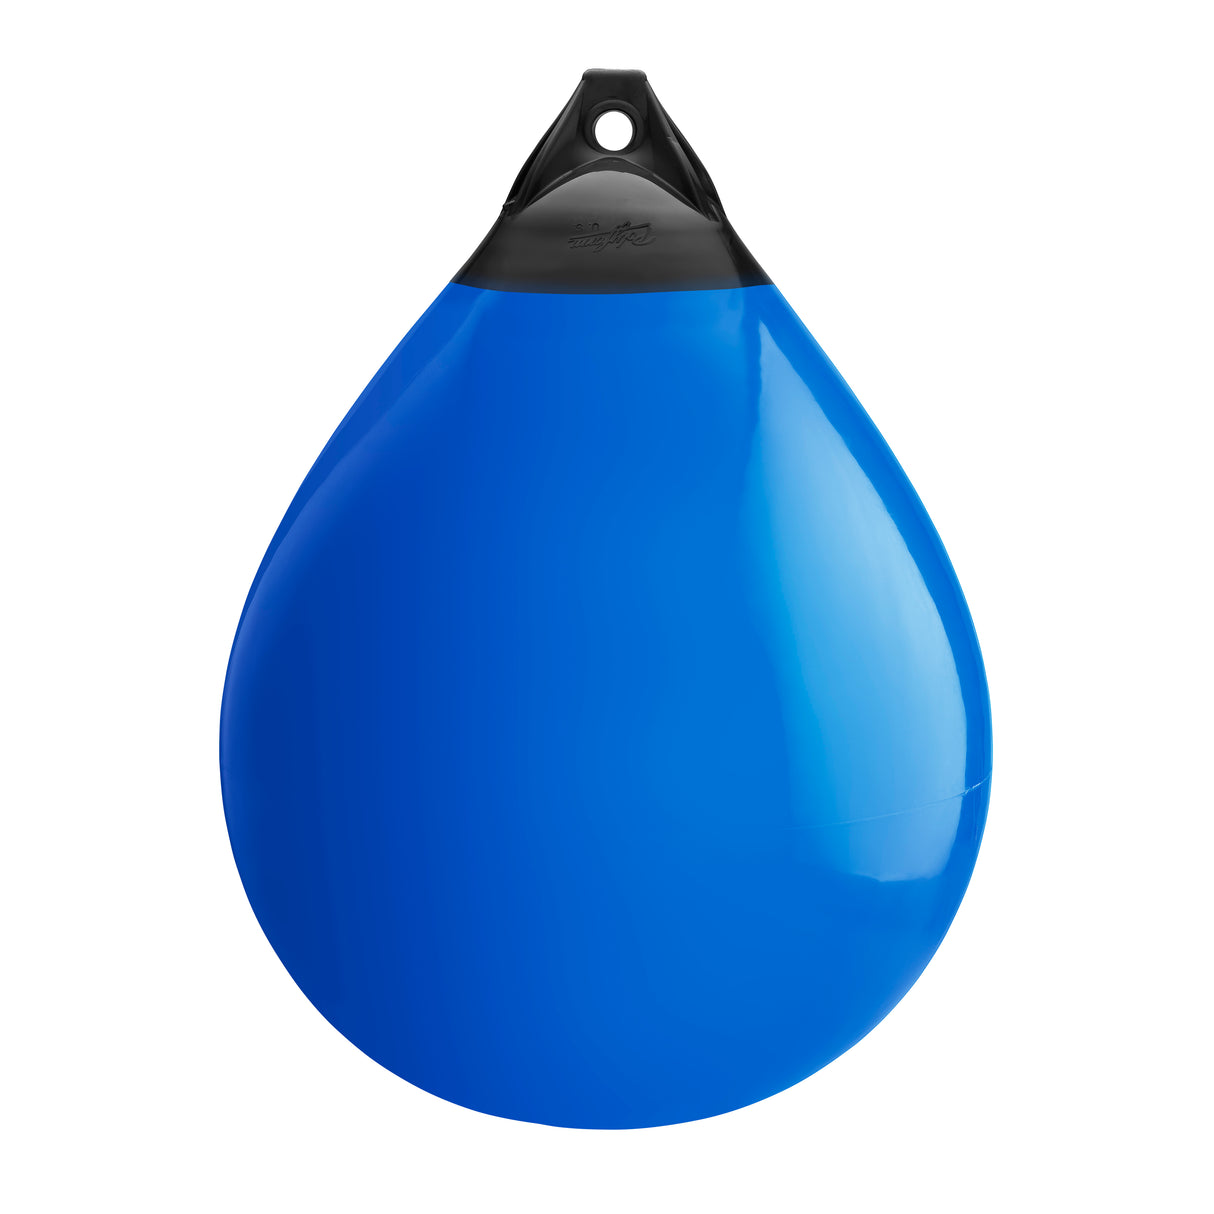 Blue buoy with Black-Top, Polyform A-7